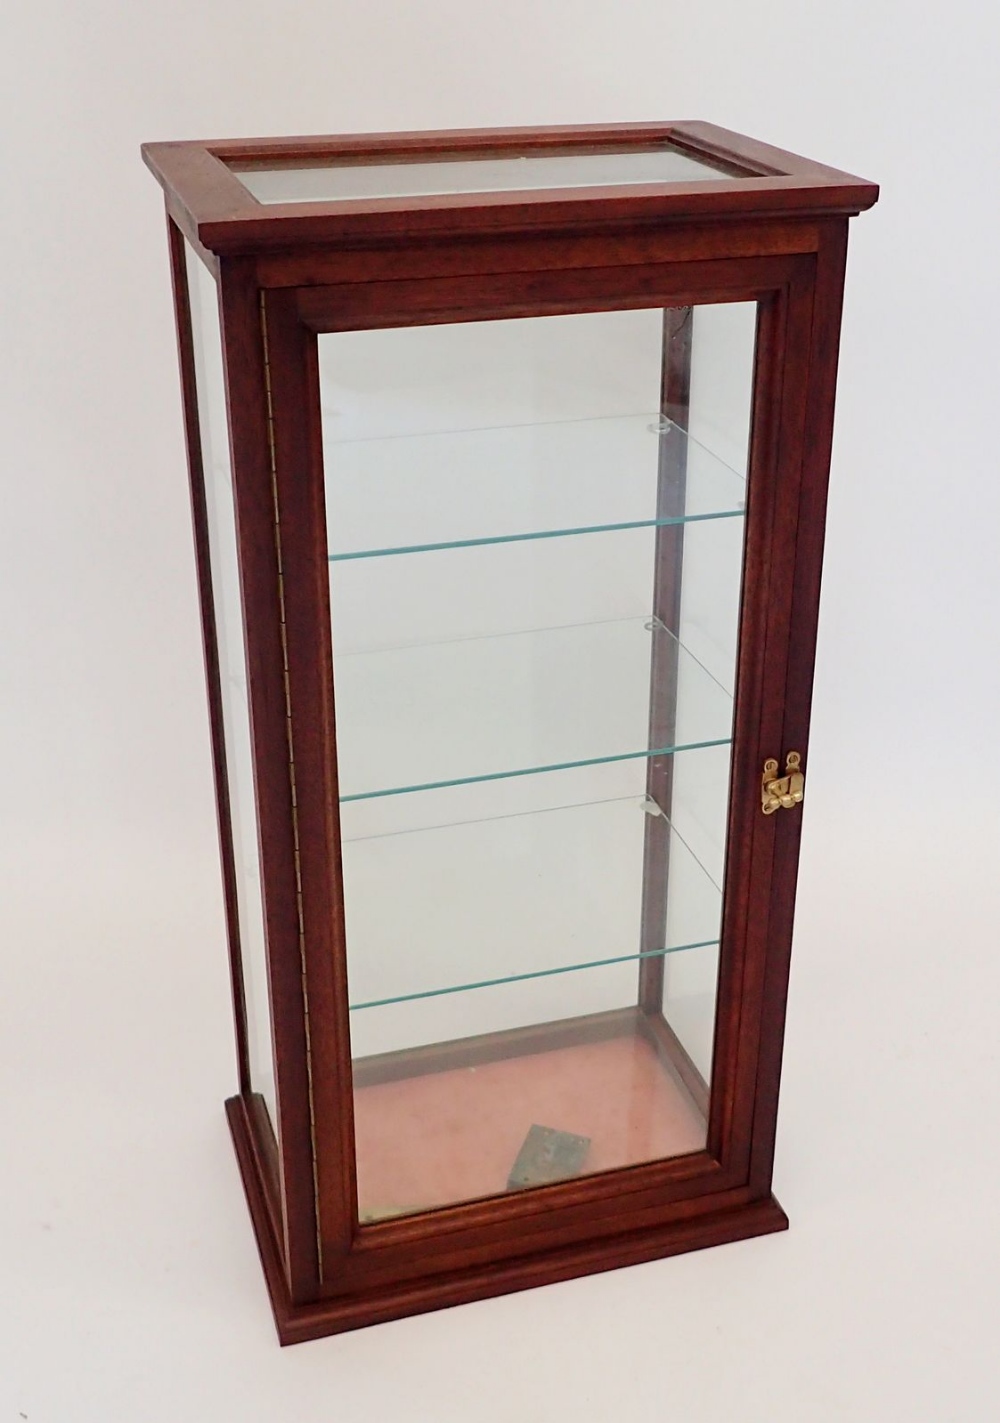 An Edwardian style mahogany shop display table top cabinet with three glass shelves, 76 x 38 x 26cm